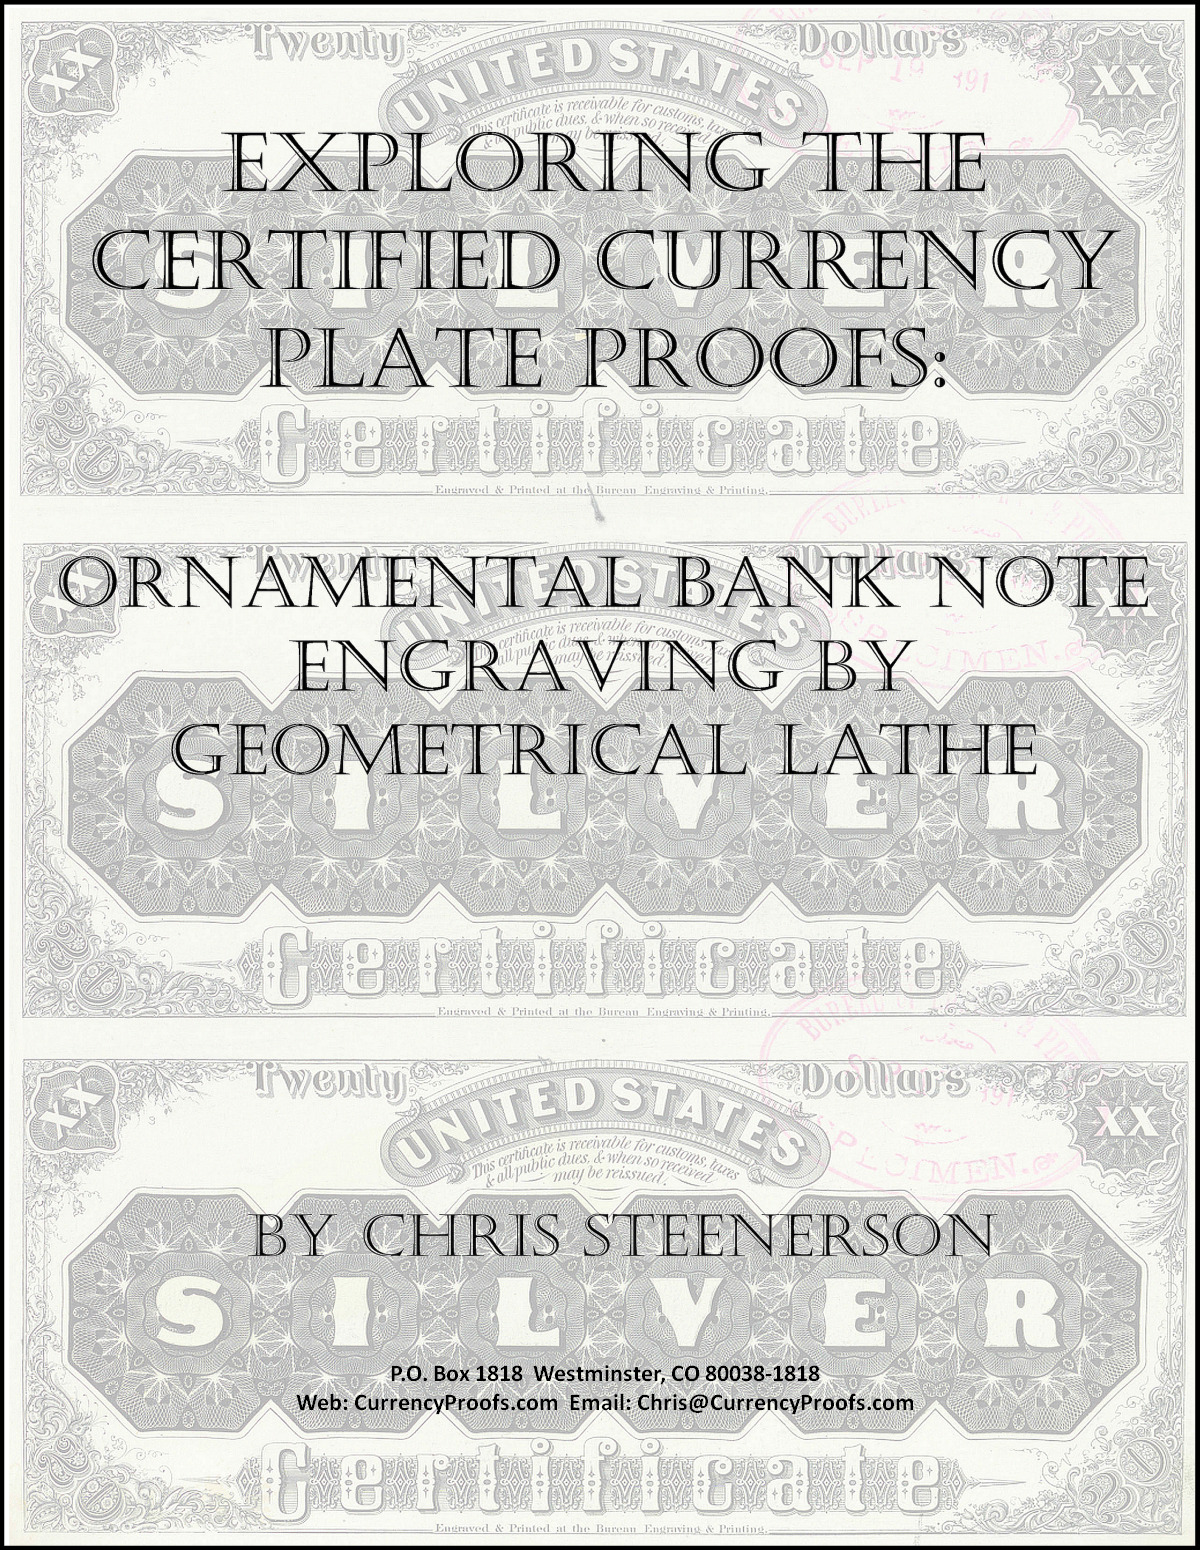 Ornamental Currency Engraving By Geometrical Lathe - 196-page Bw Books